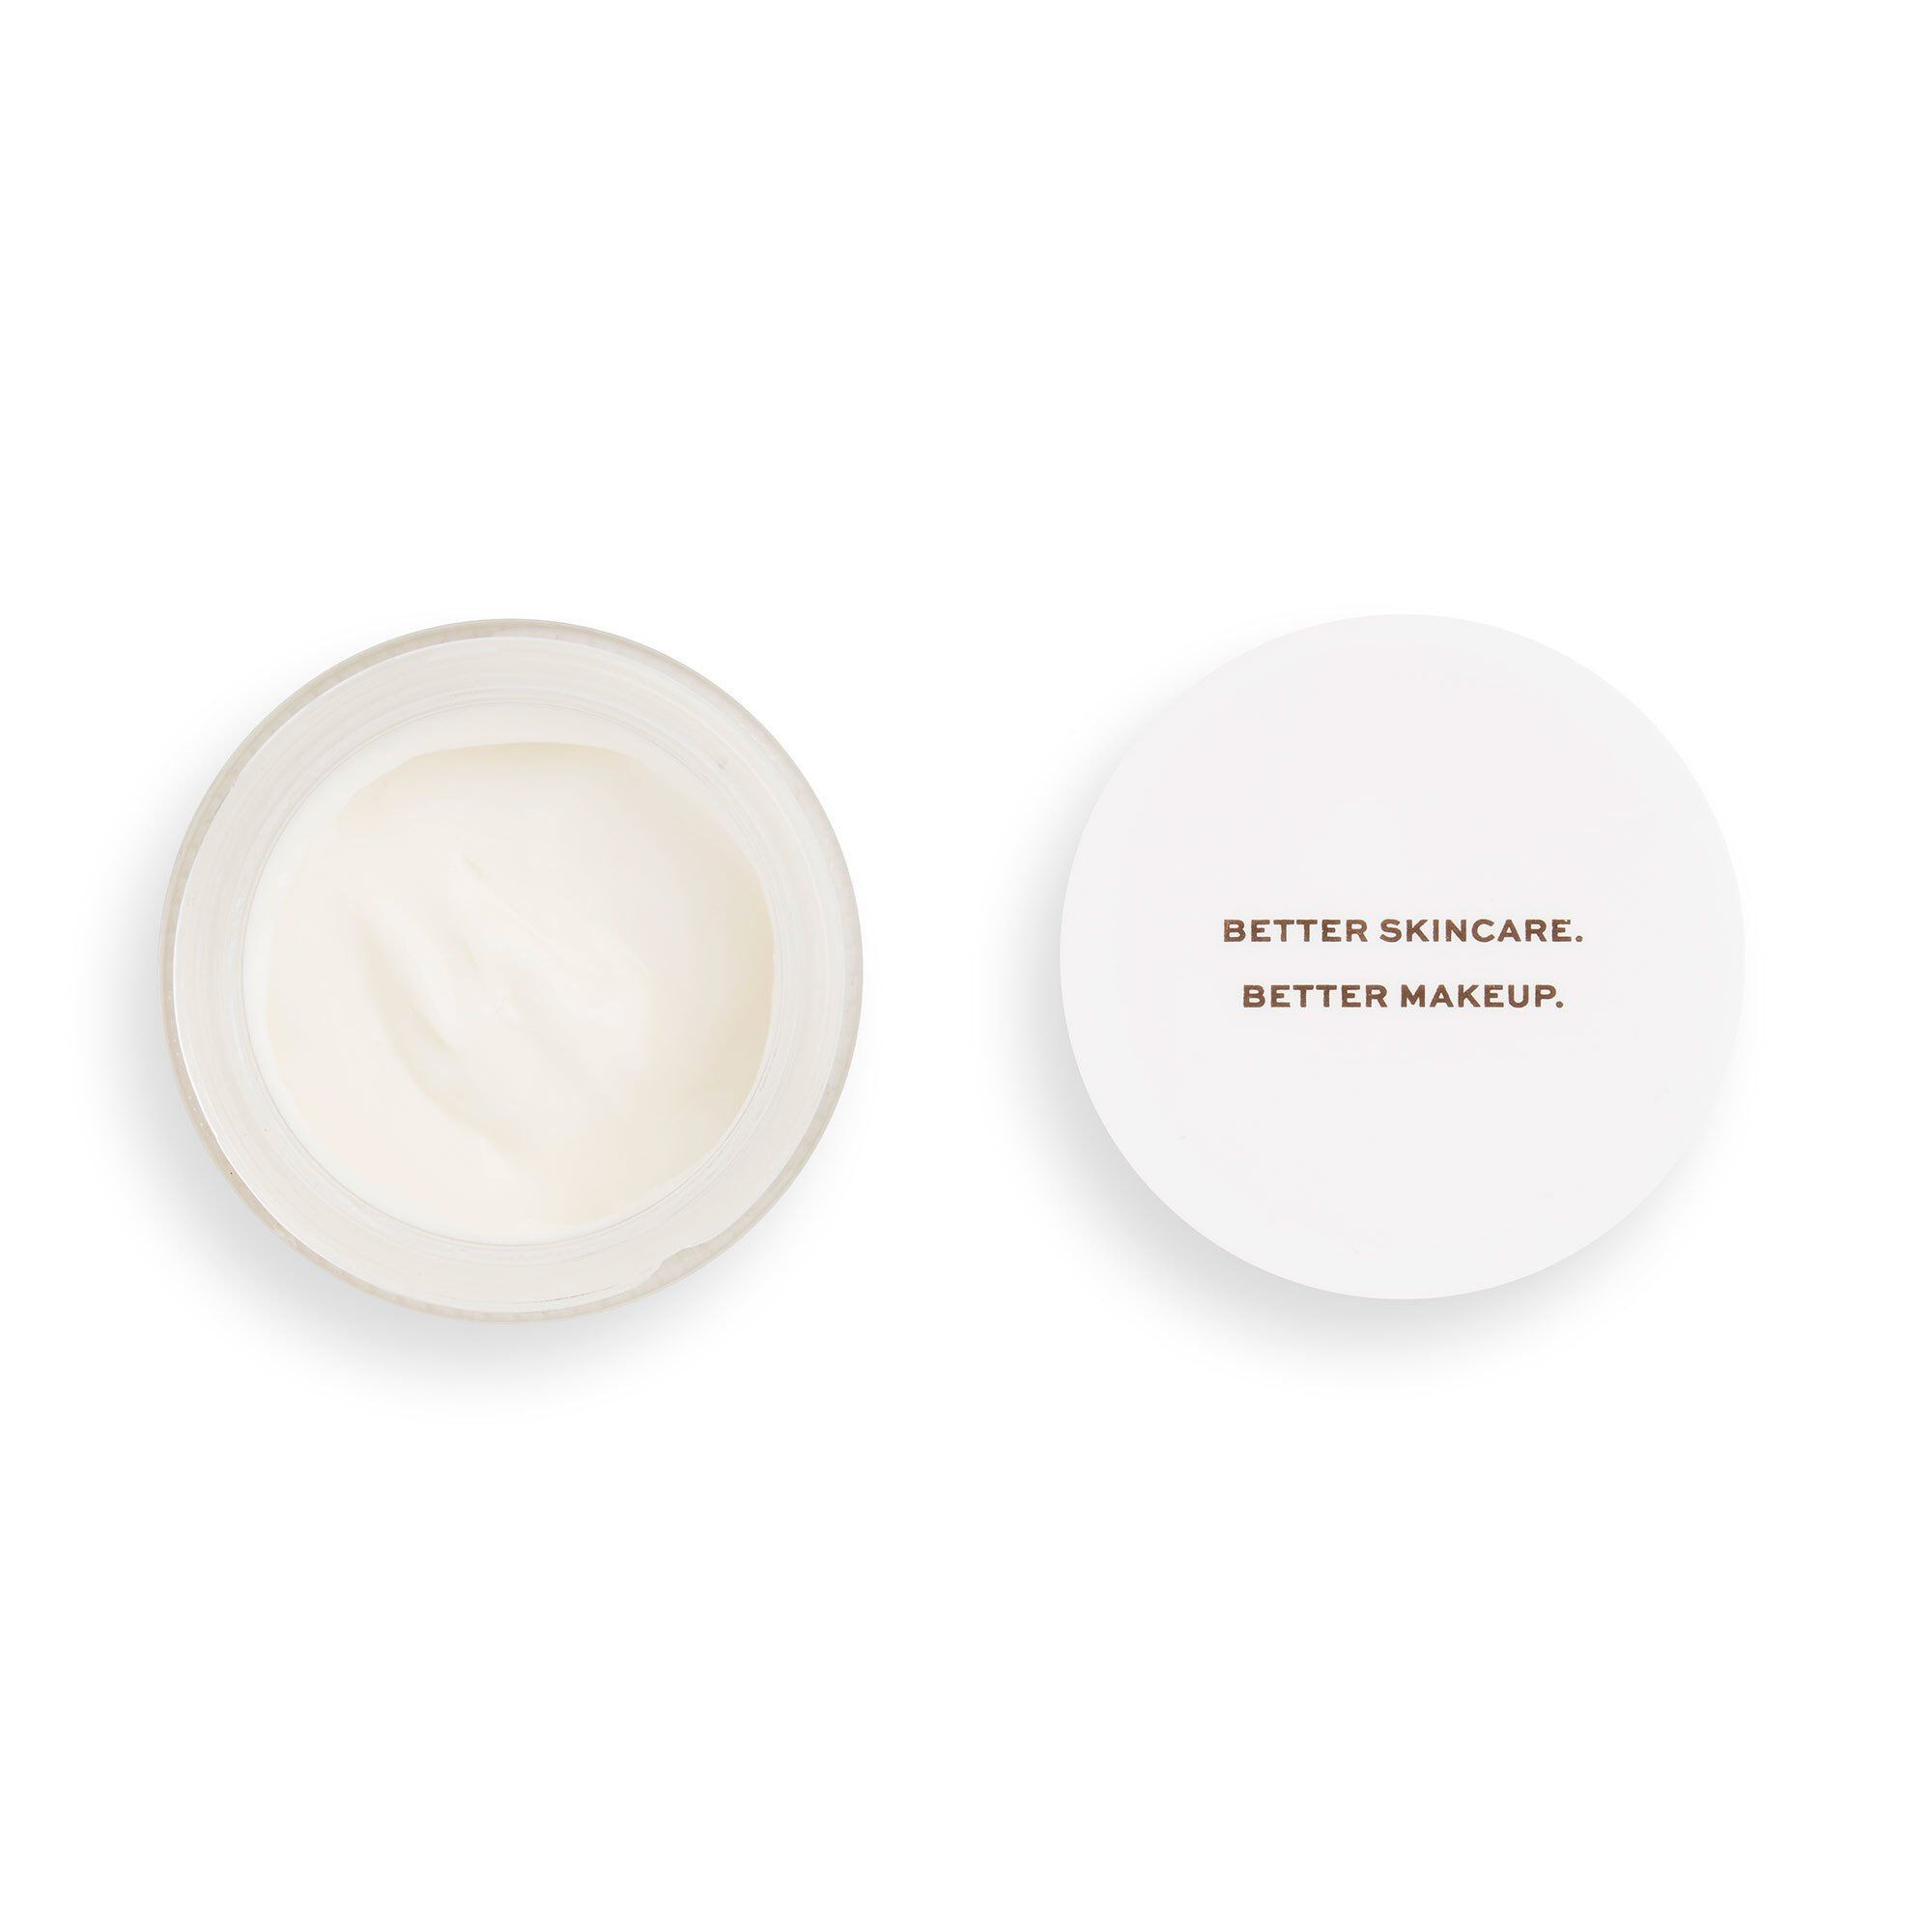 Moisture Cream - Protecting Boost SPF15 - Normal to Dry Skin 